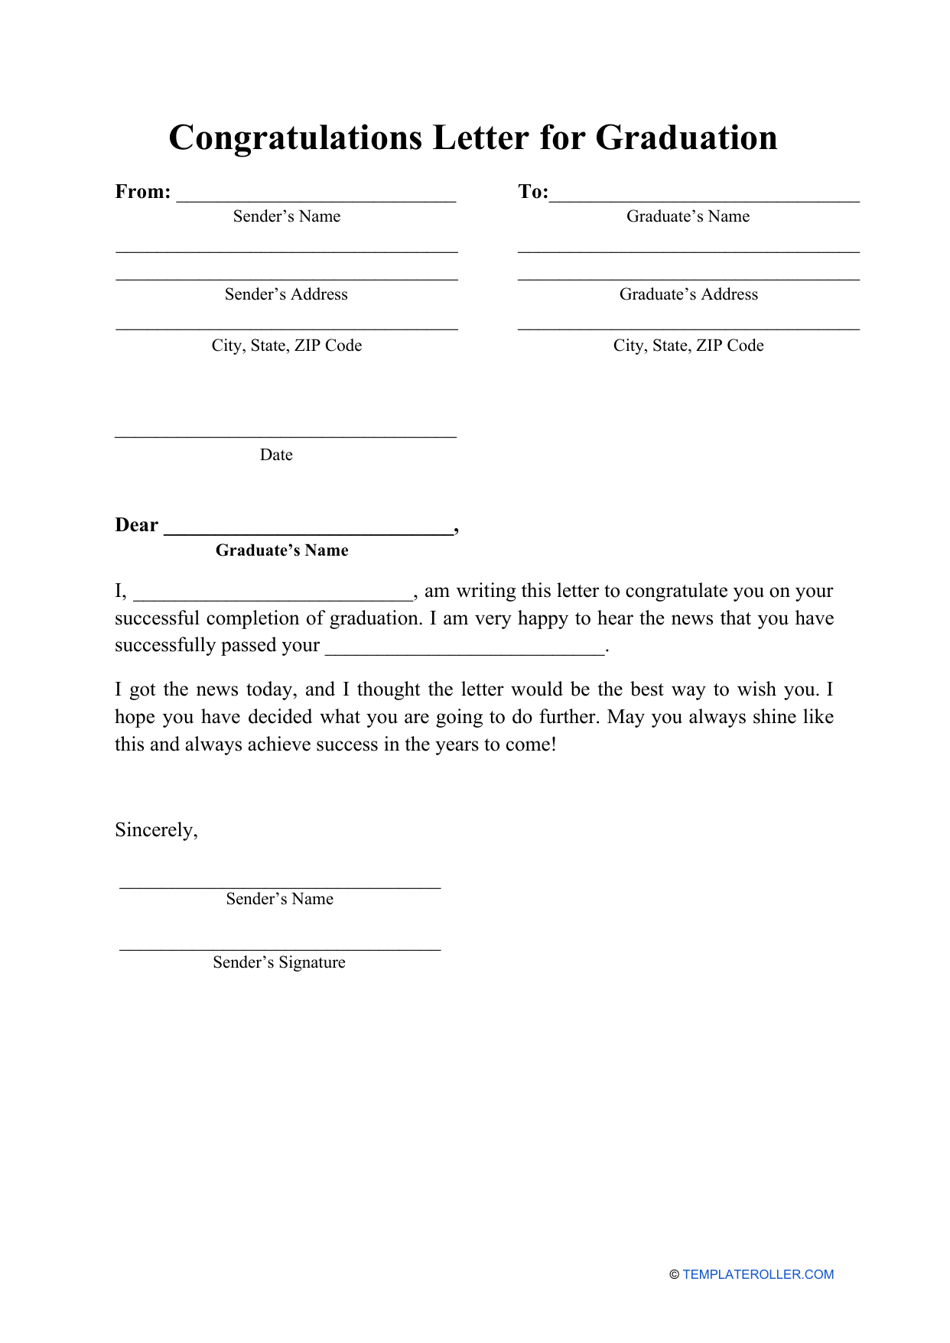 Congratulations Letter for Graduation depicted by a celebratory and elegant template design for graduates.